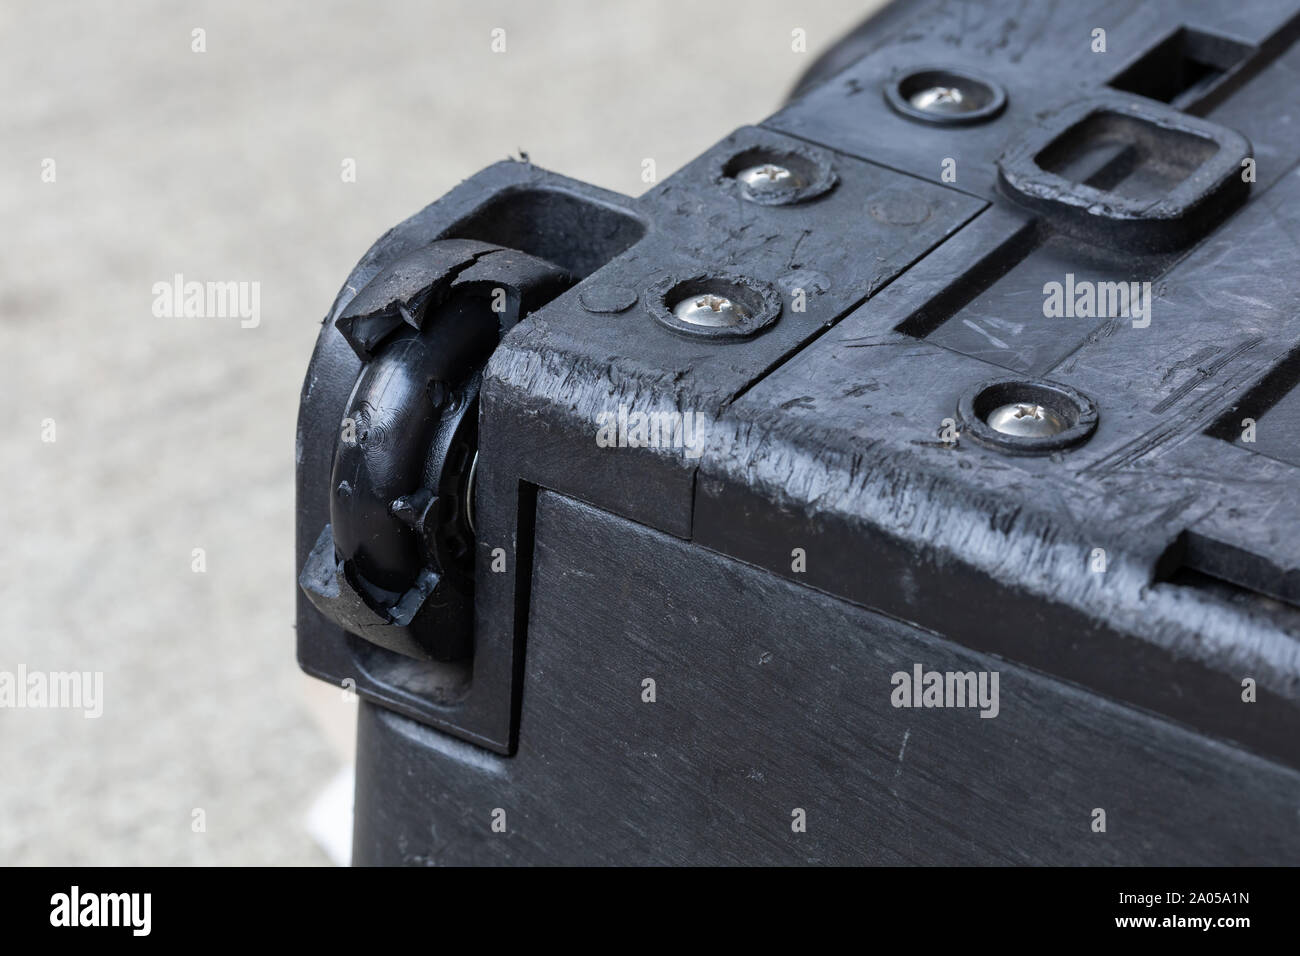 Close up cracked damaged broken expired ruined torn rubber bearing hardcase suitcase  luggage wheel need replacement to repair or fix problem Stock Photo - Alamy